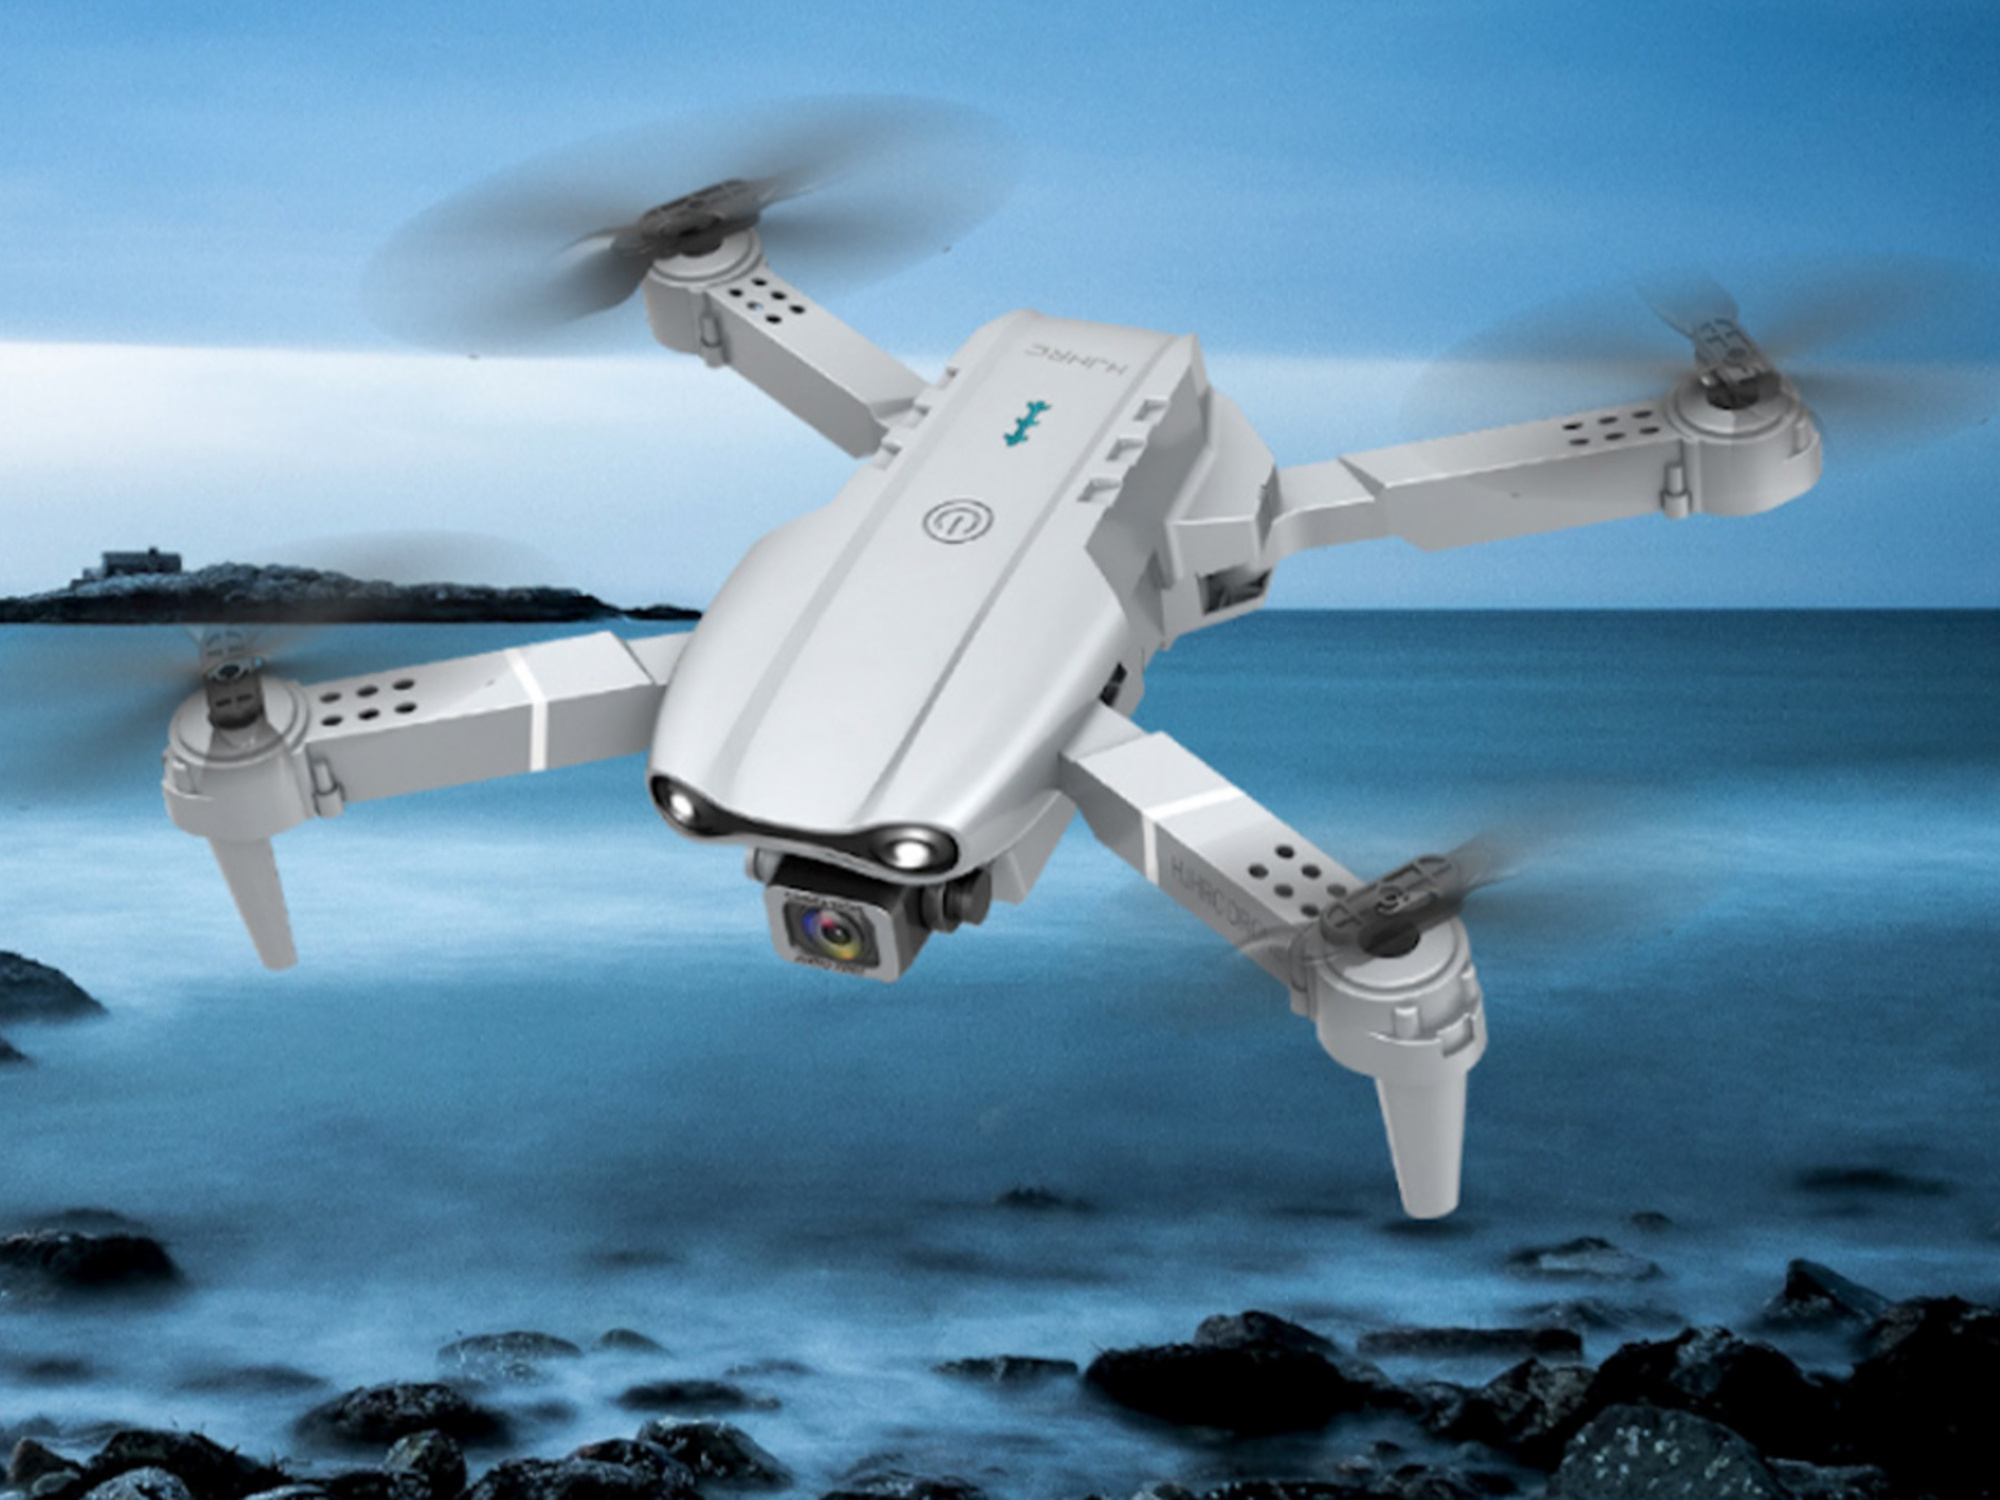 Let yourself be a kid again with 67% off these two drones